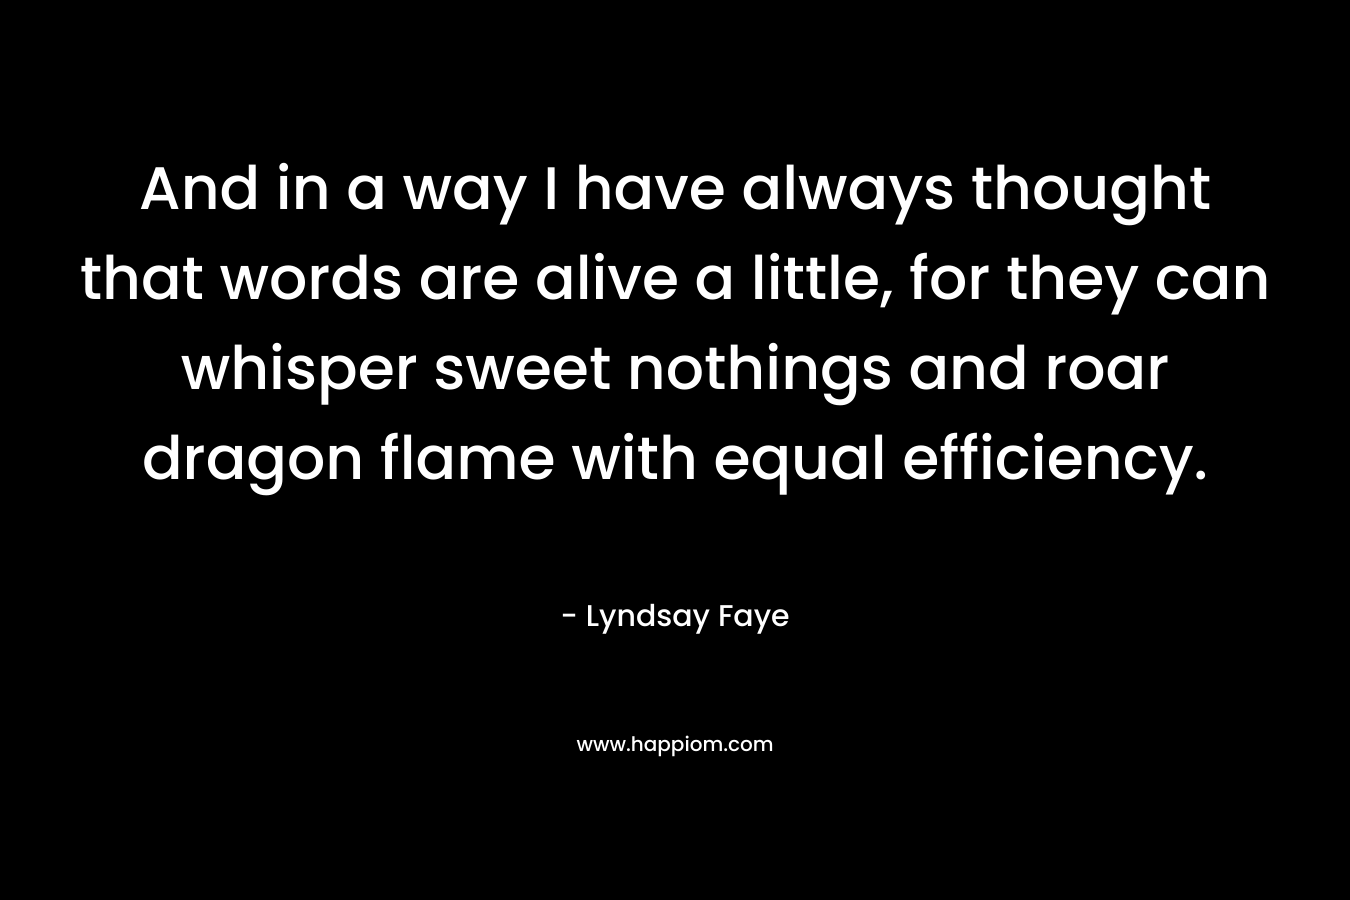 And in a way I have always thought that words are alive a little, for they can whisper sweet nothings and roar dragon flame with equal efficiency.